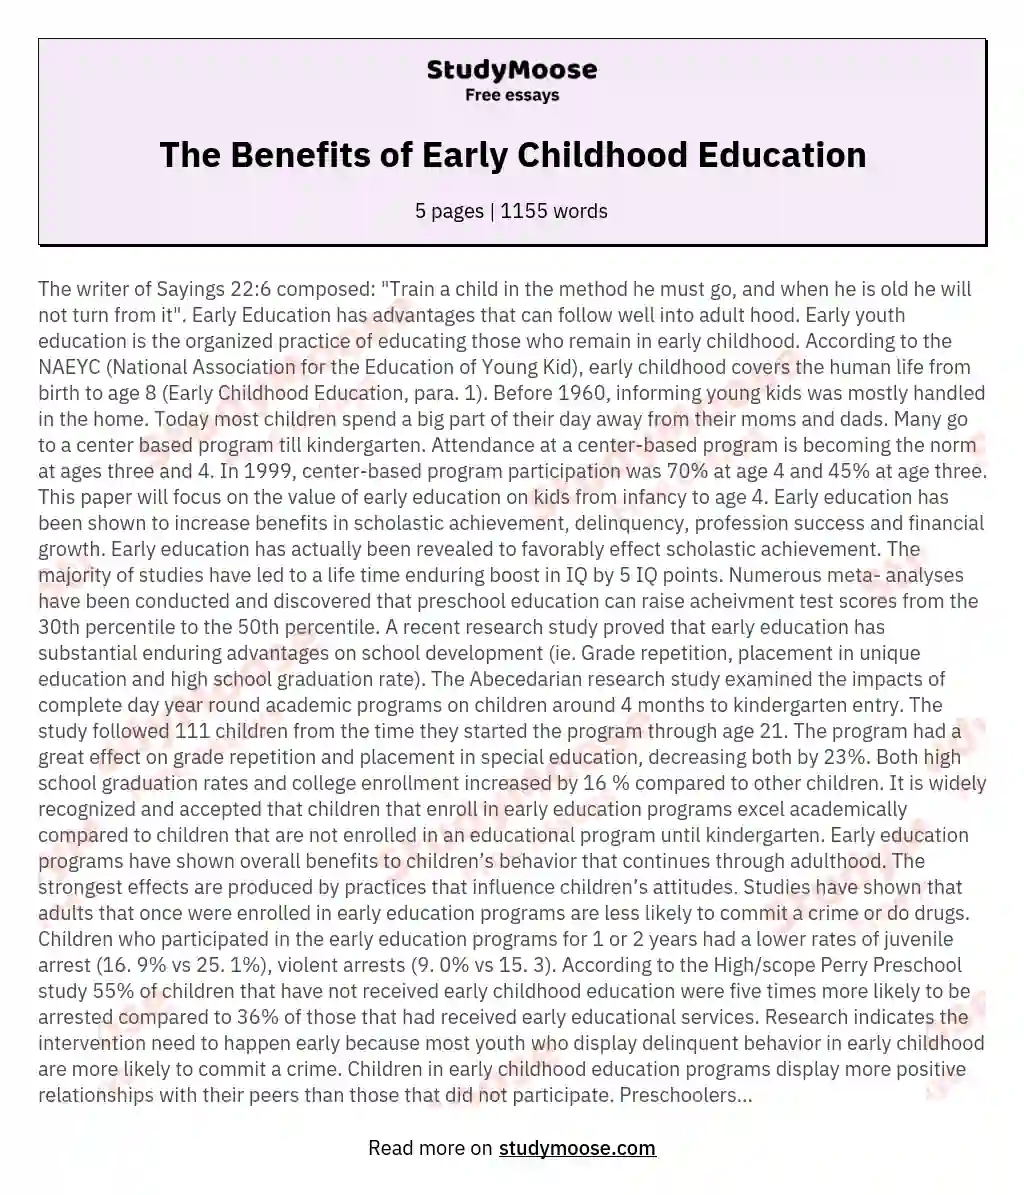 The Benefits of Early Childhood Education essay